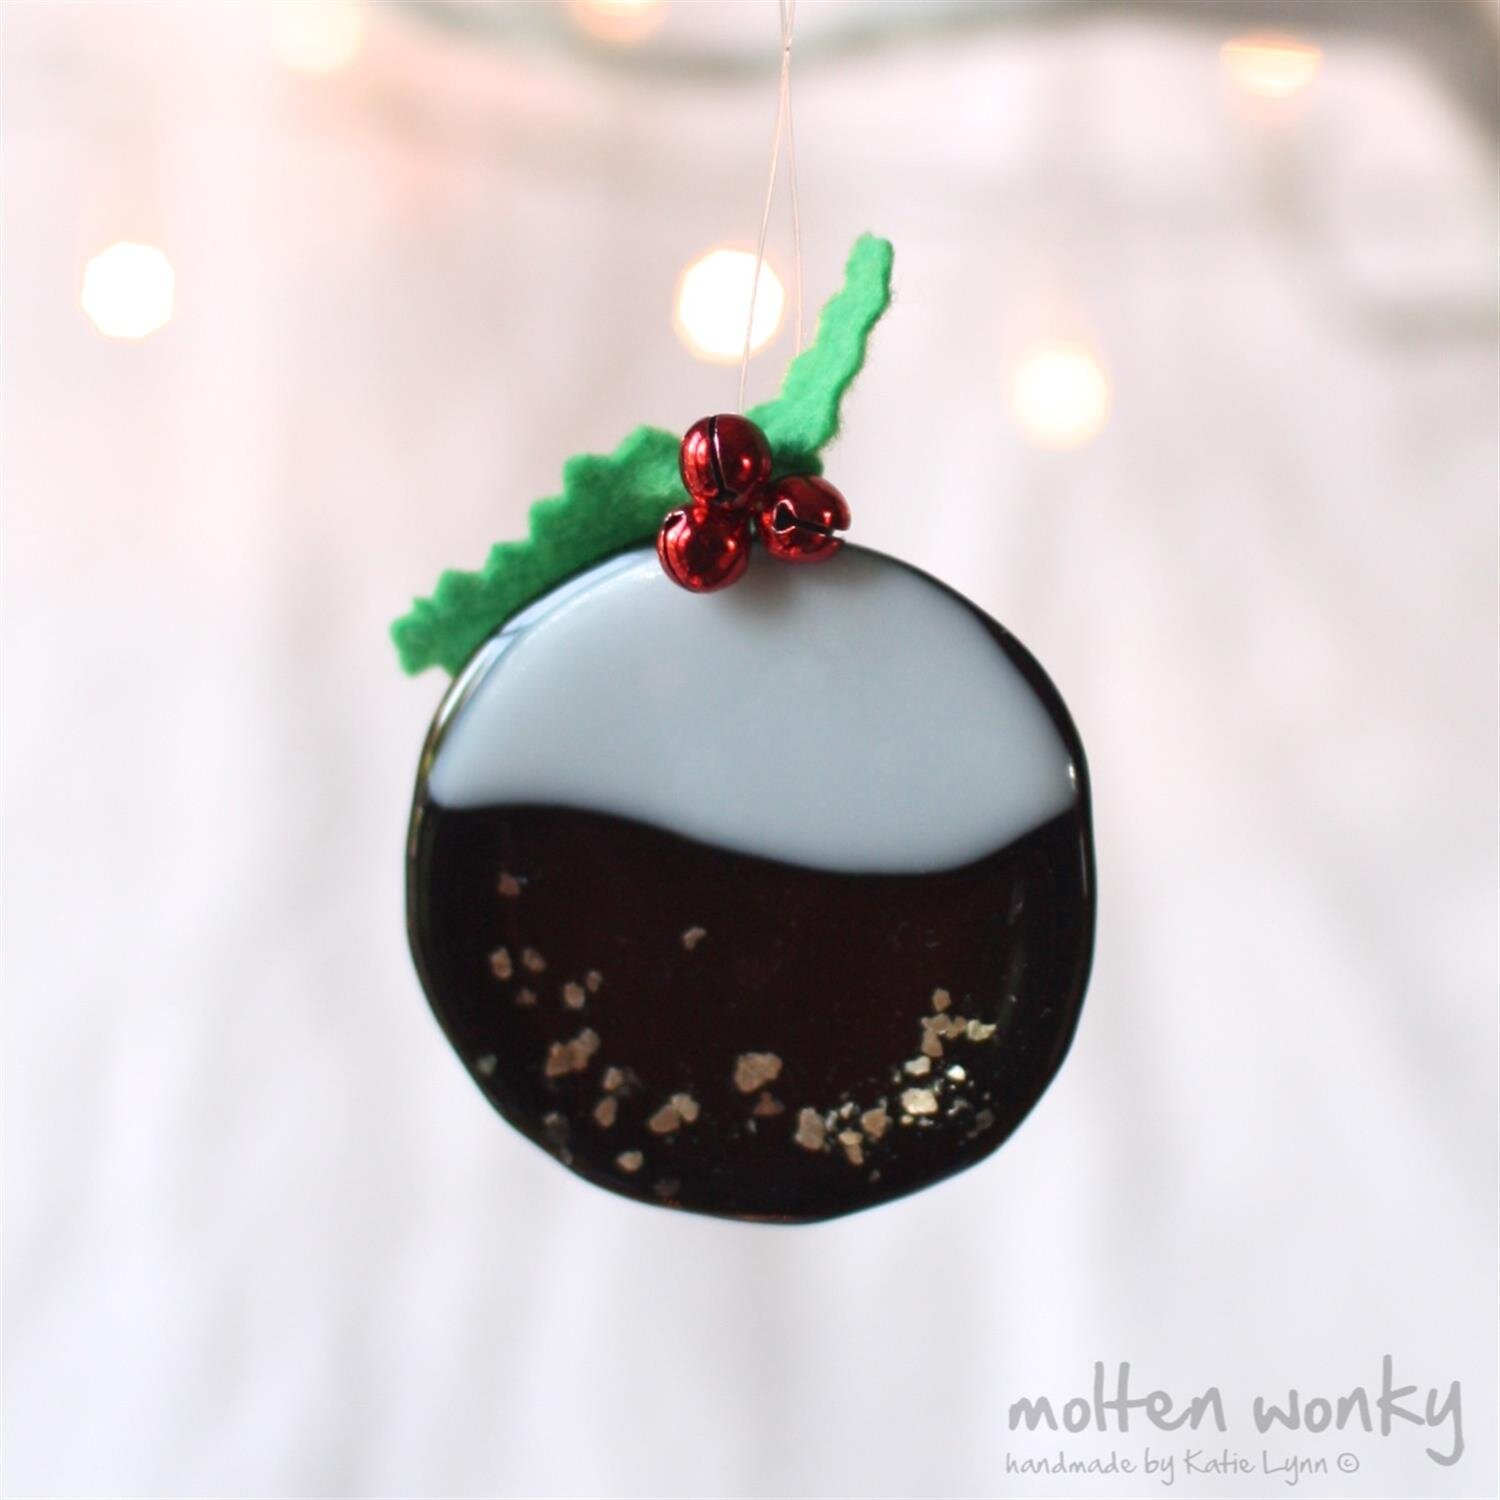 christmas-pudding-small-solid-icing-fused-glass-handmade-decoration-8500-molten-wonky01jpg-2017-10-06-at-16-12-18.png